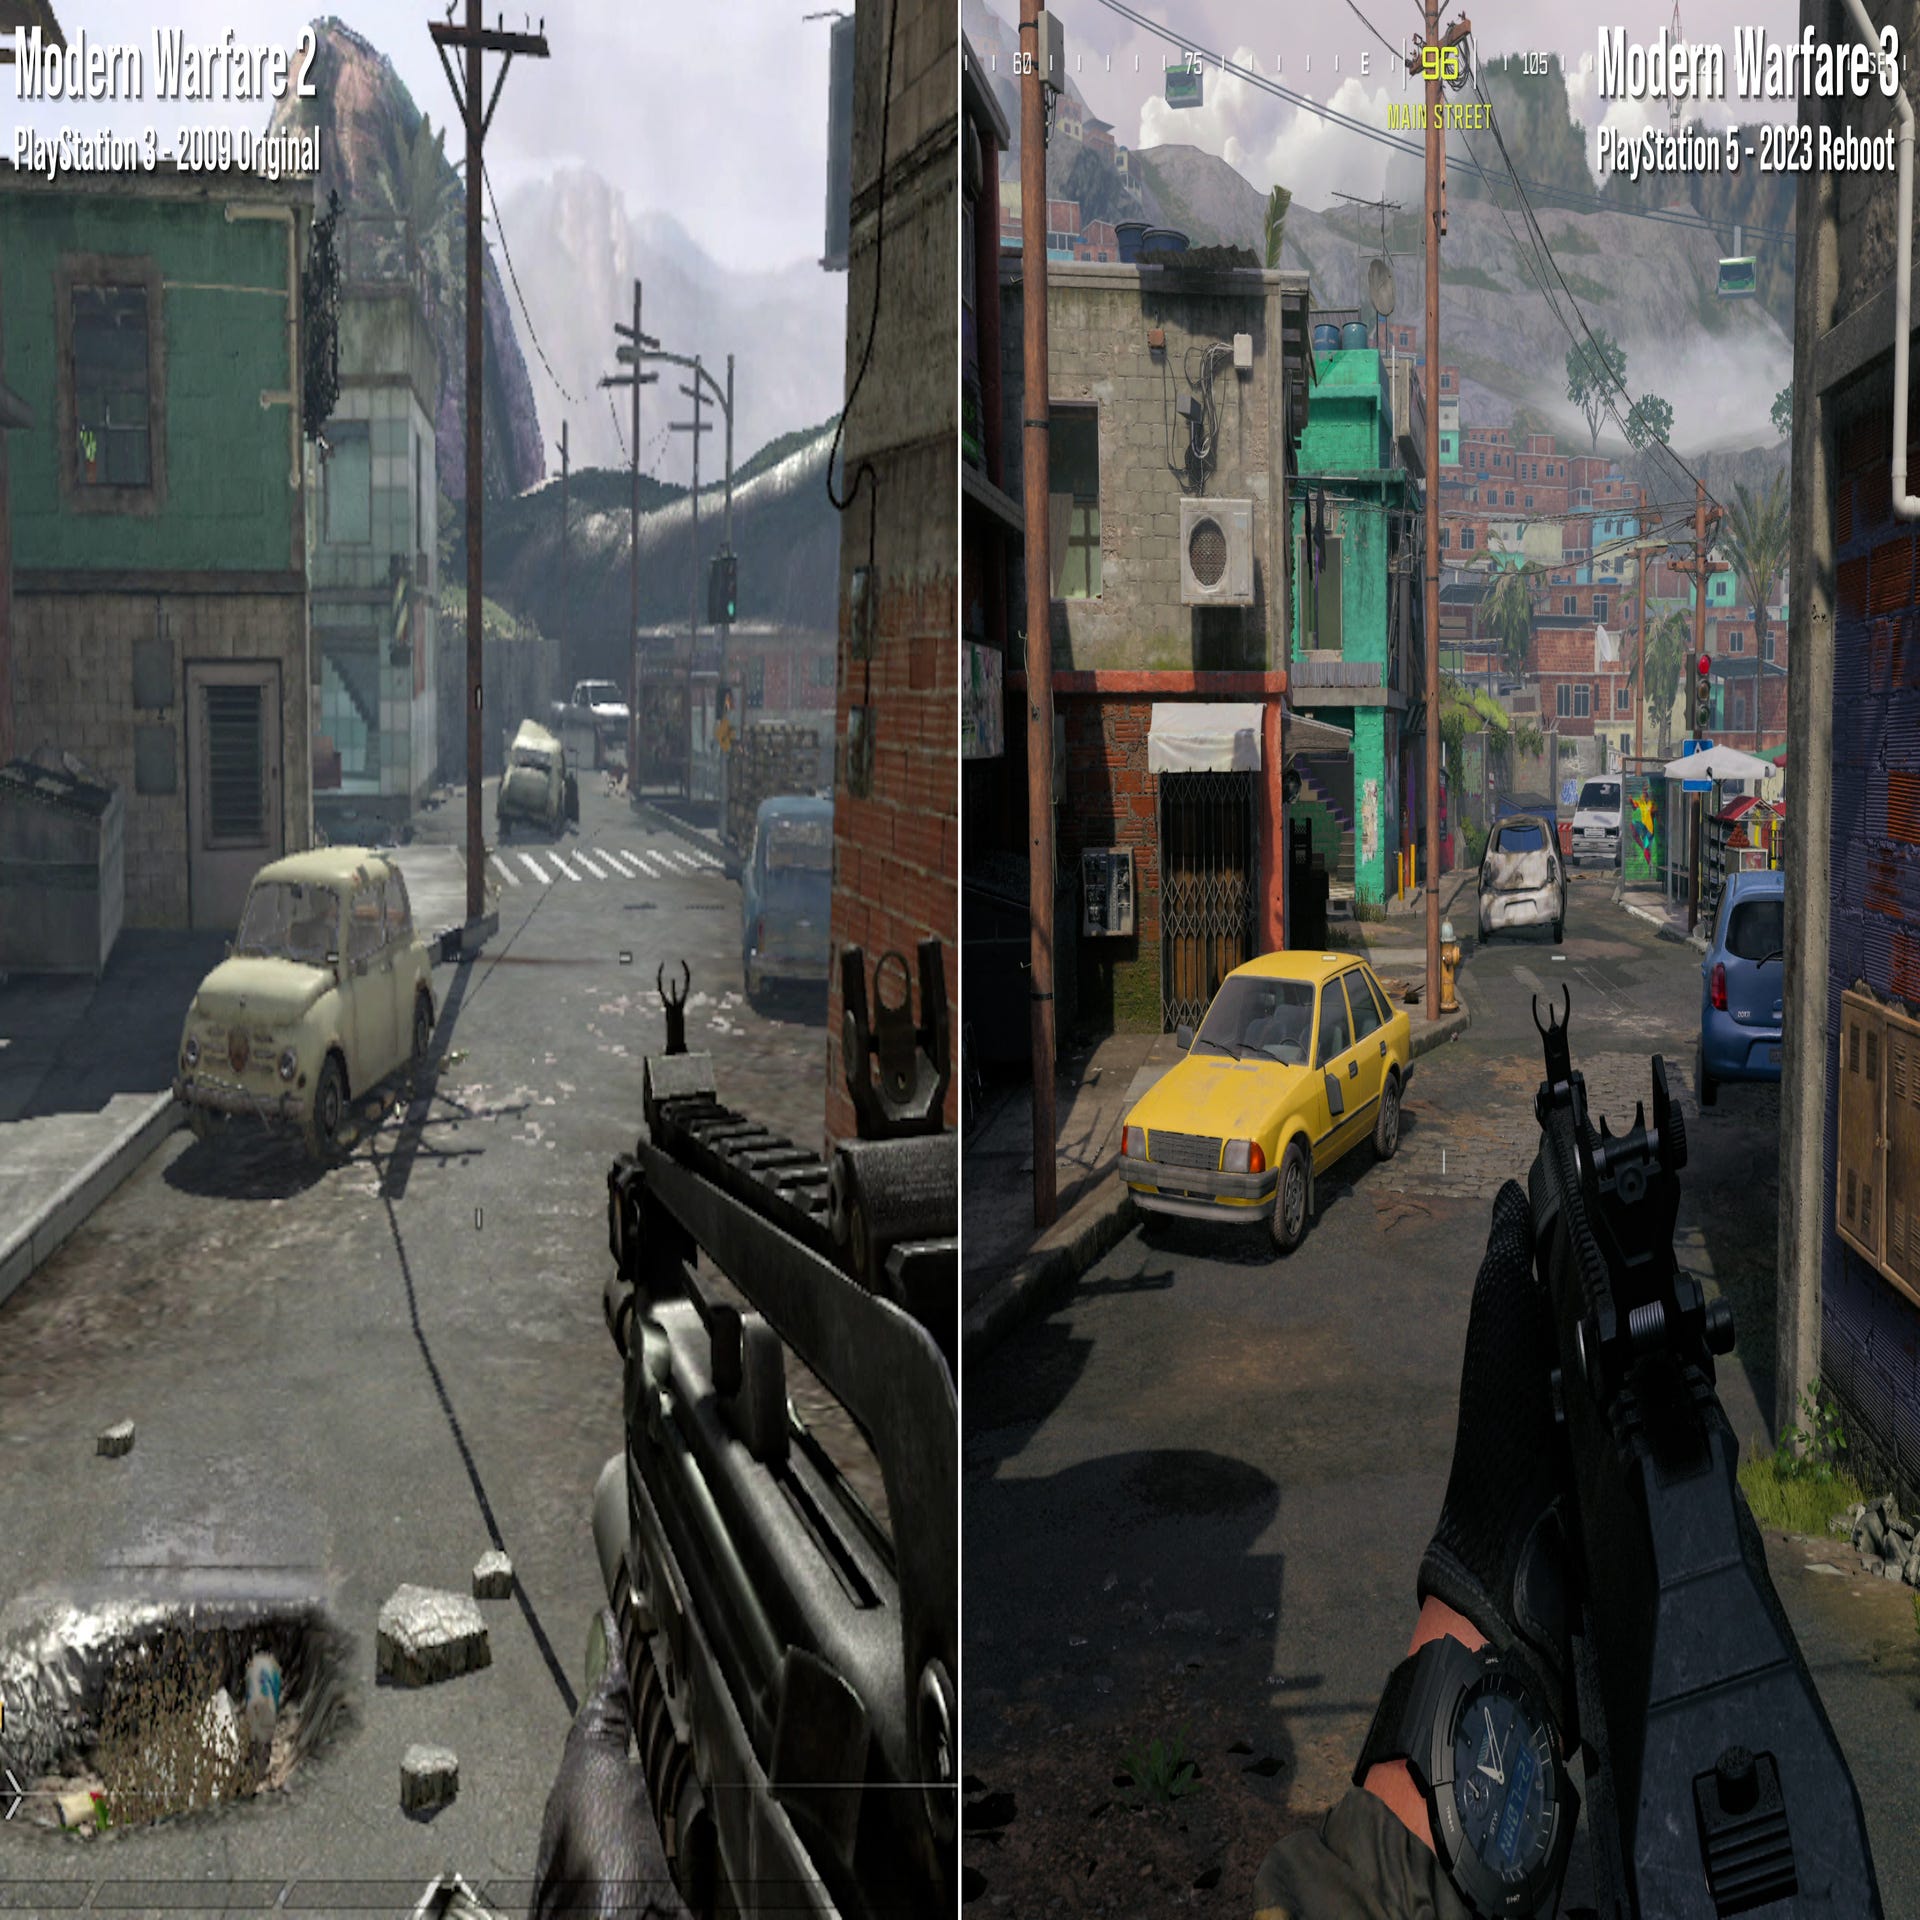 Call of Duty: Modern Warfare 3 runs well on PS5 and Series X - but Series S  has issues